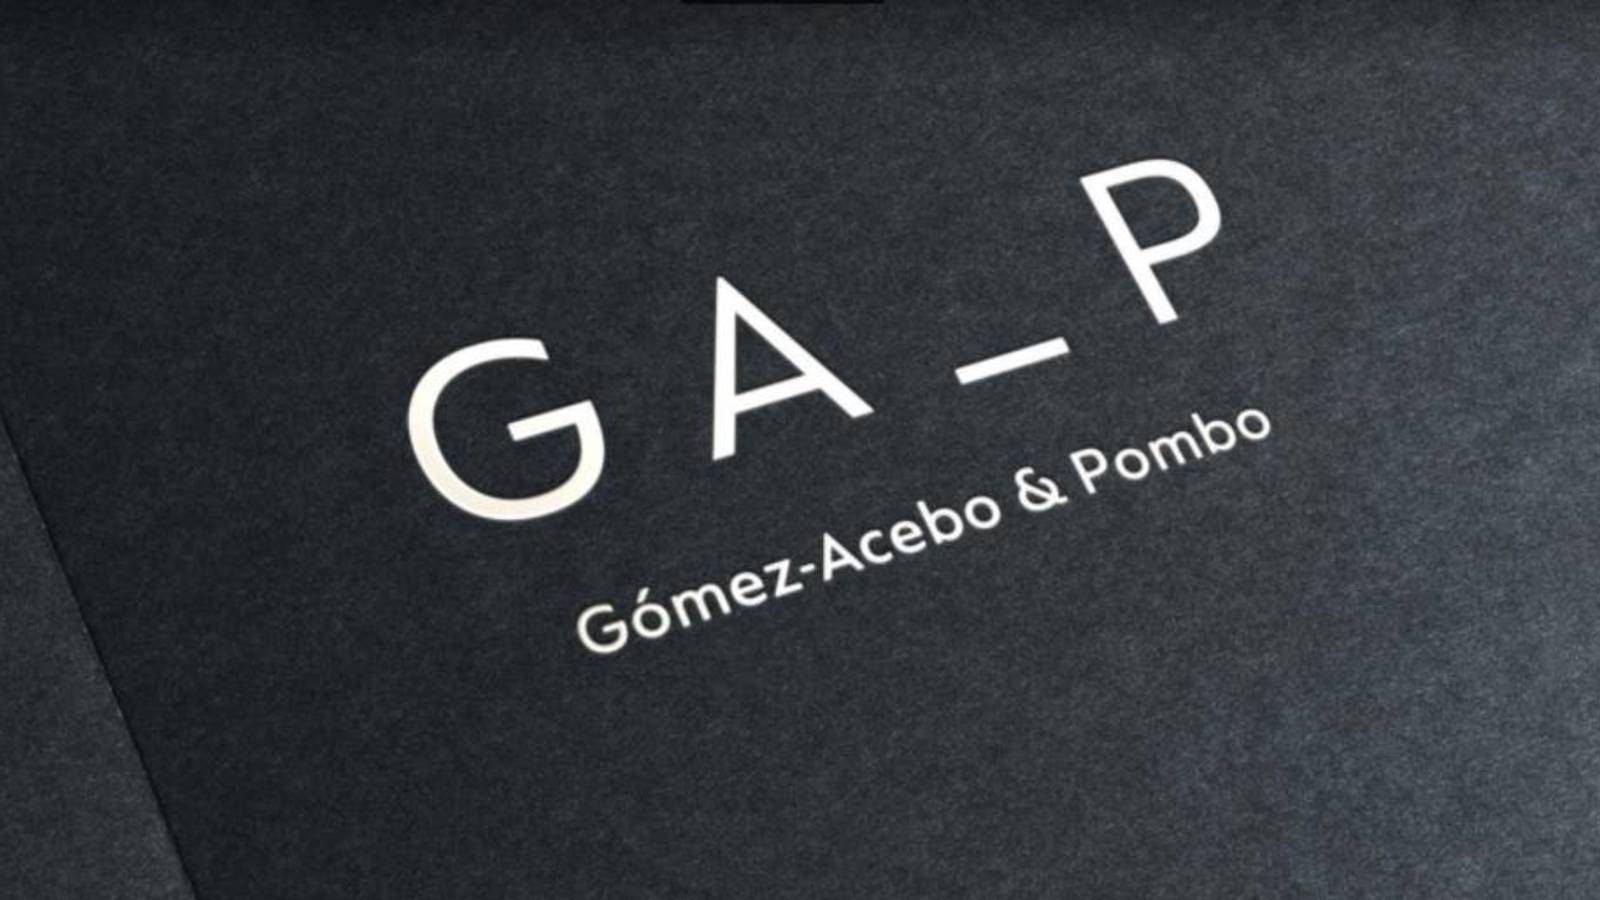 The cryptocurrency of the firm Gómez - Acebo & Pombo will be used for the payment of legal services and currently for activities and charities